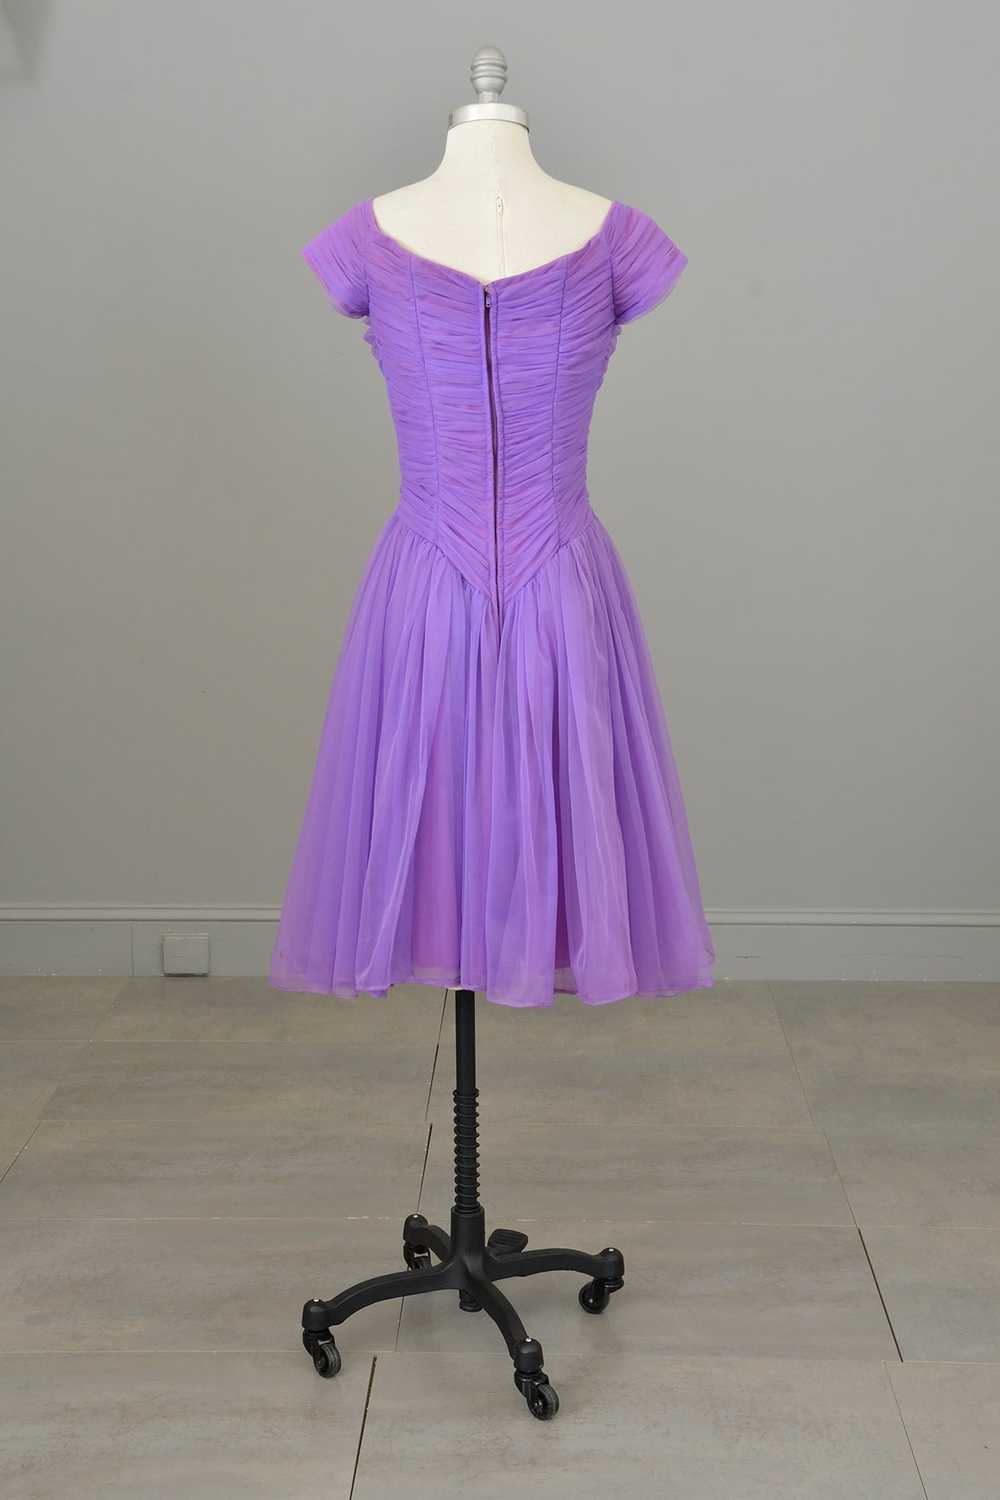 1960s 70s Vibrant Purple Ruched Party Dress - image 3